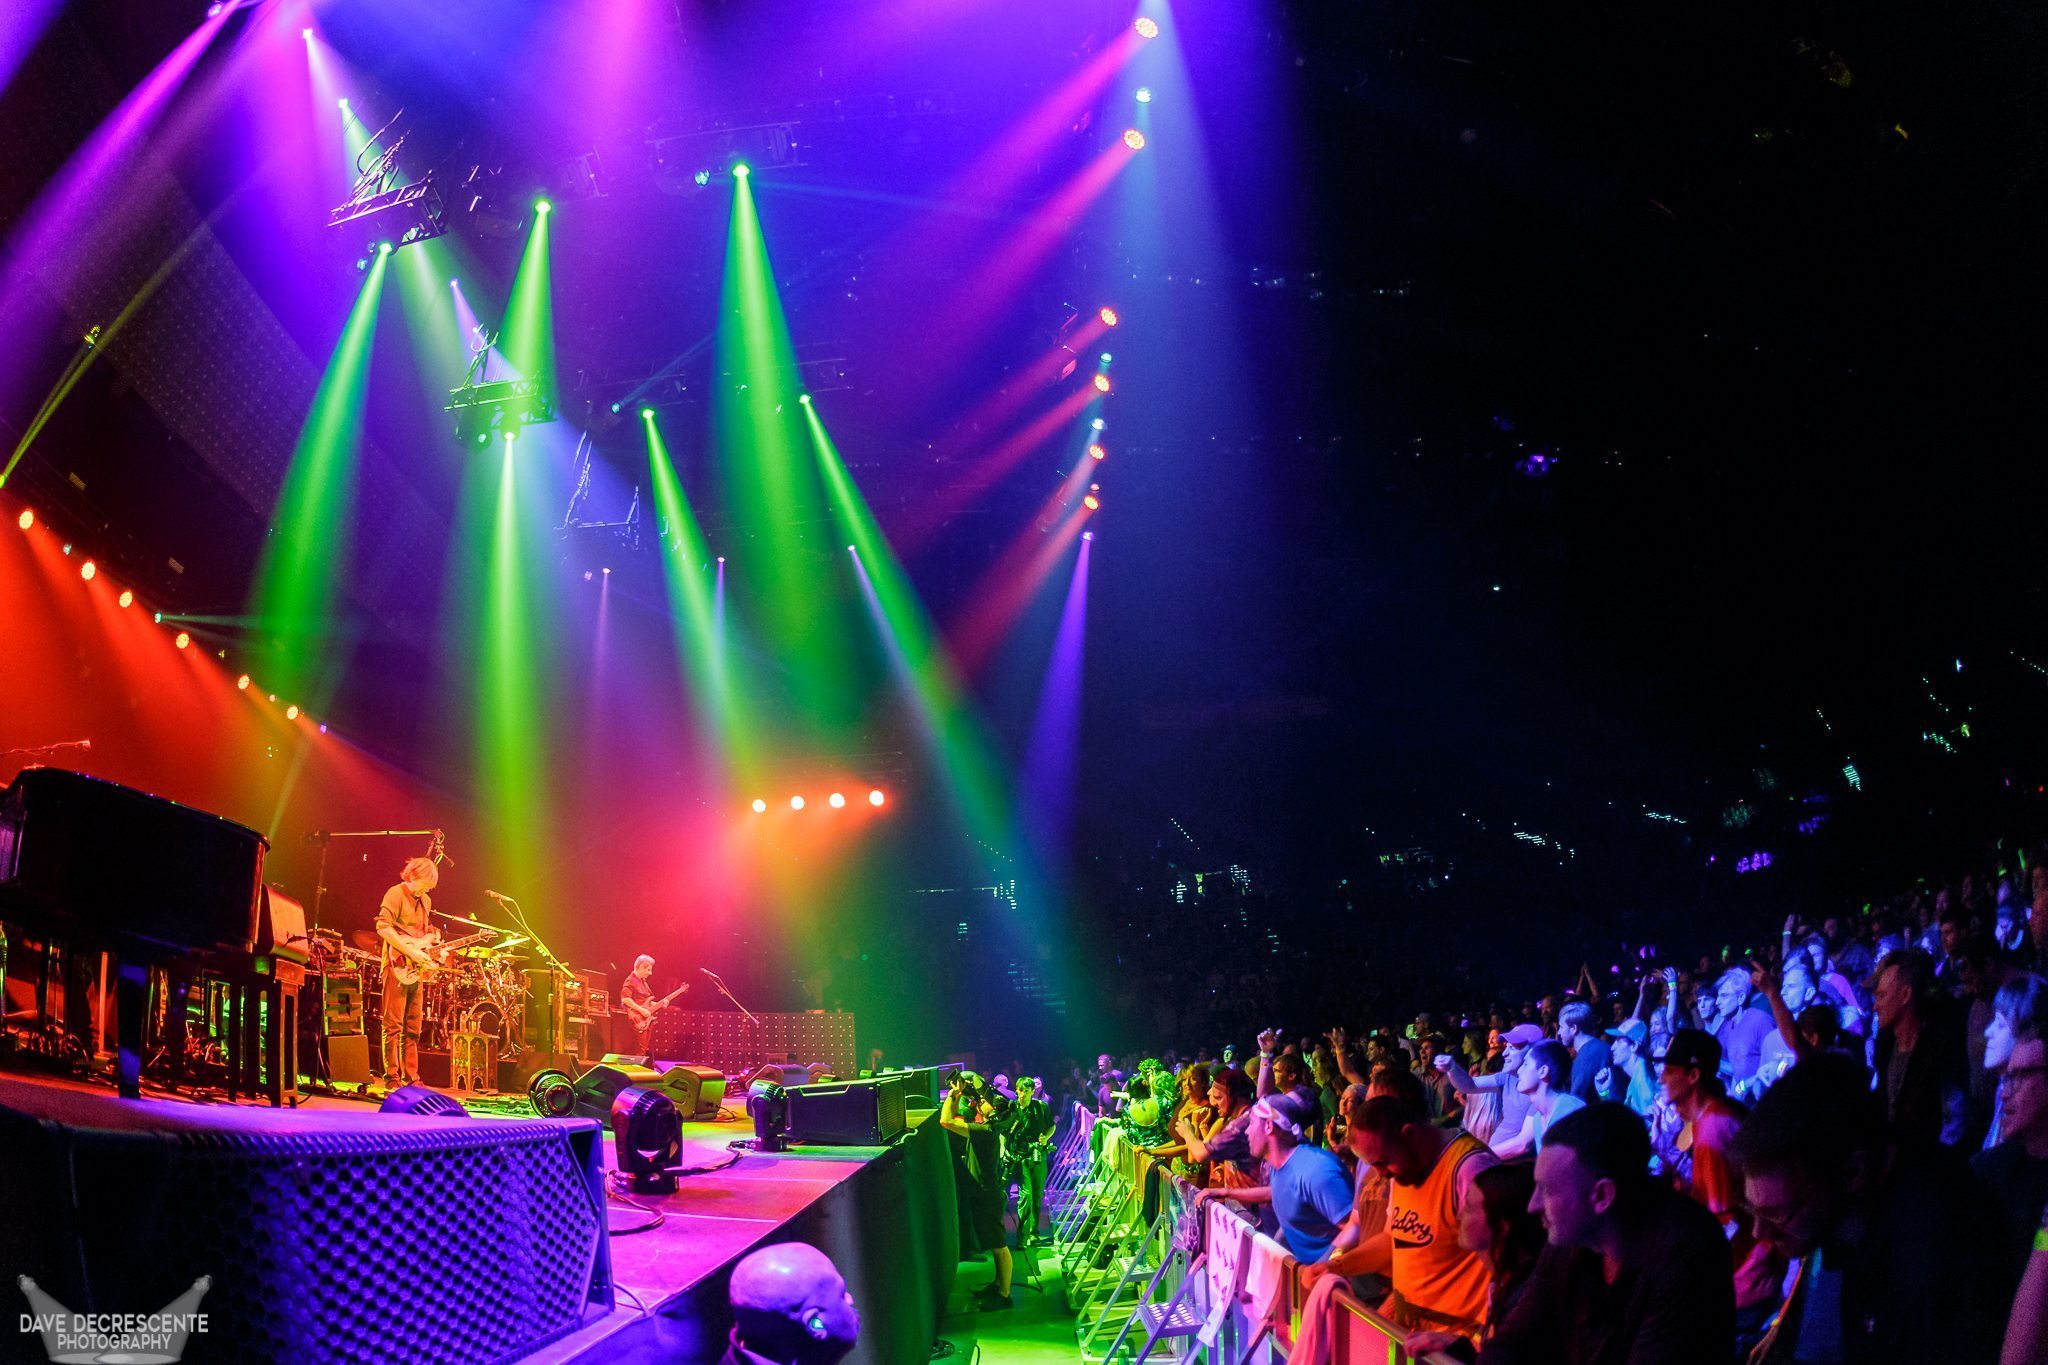 Phish Put On An InstantClassic Performance During Their Second Night